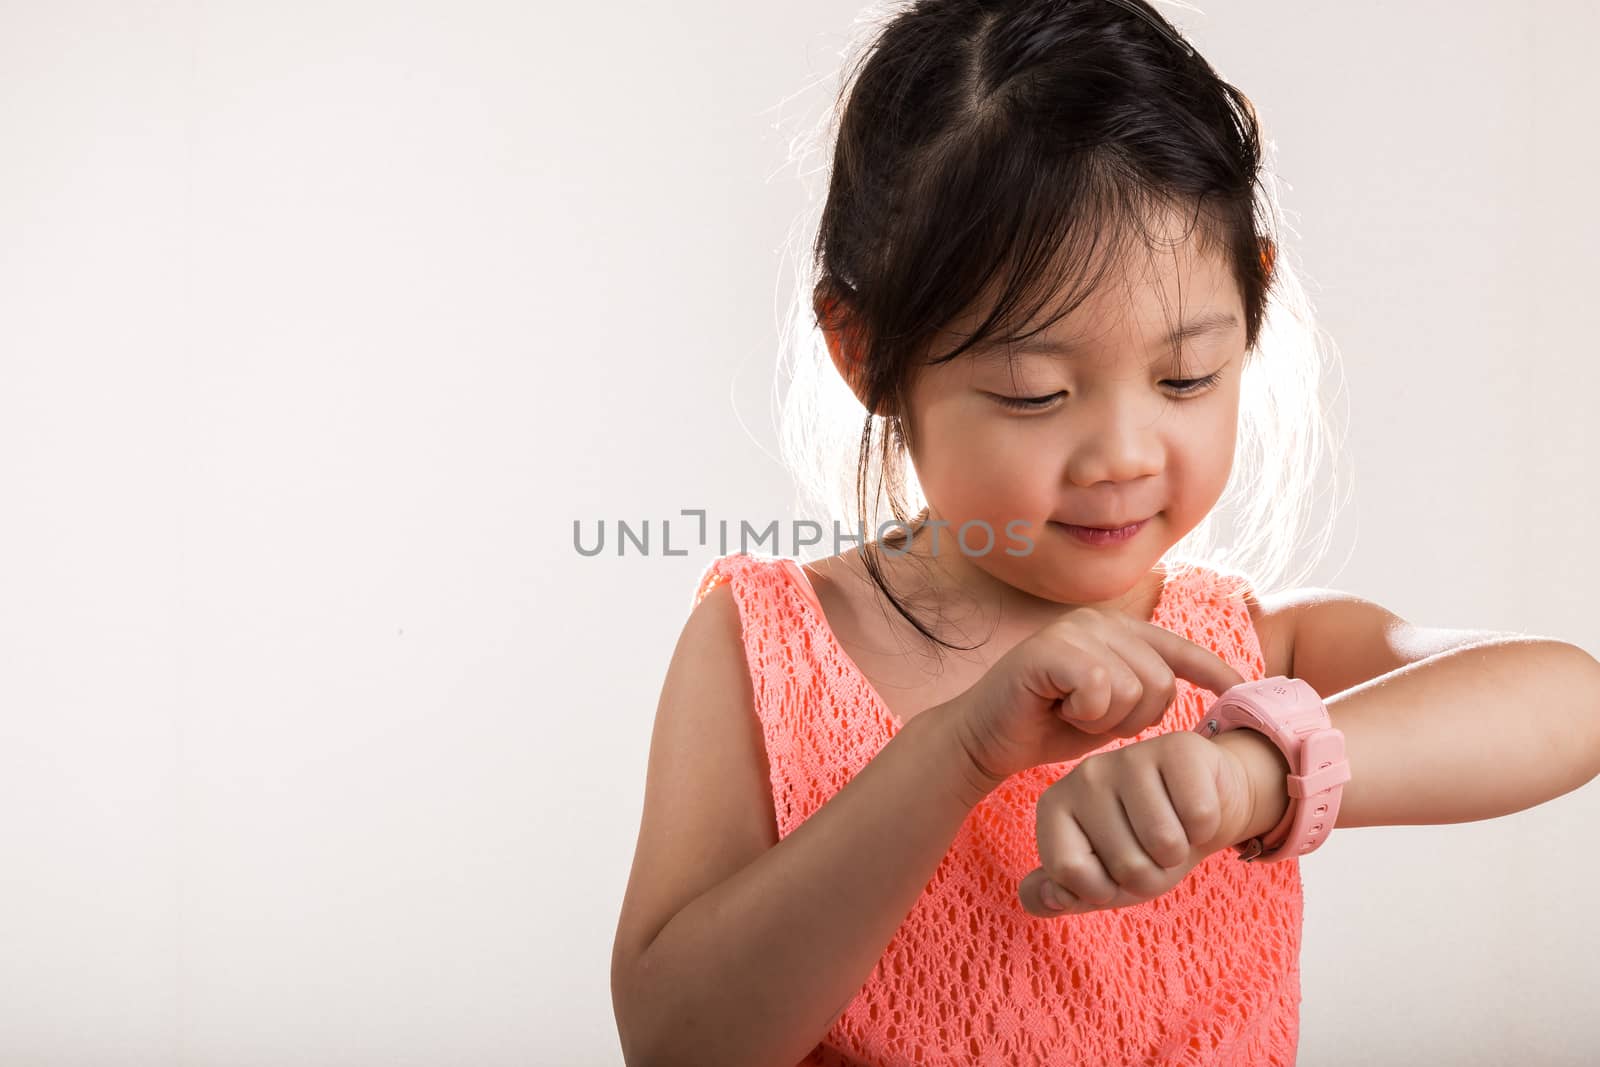 Little girl is using smartwatch on her wrist background.